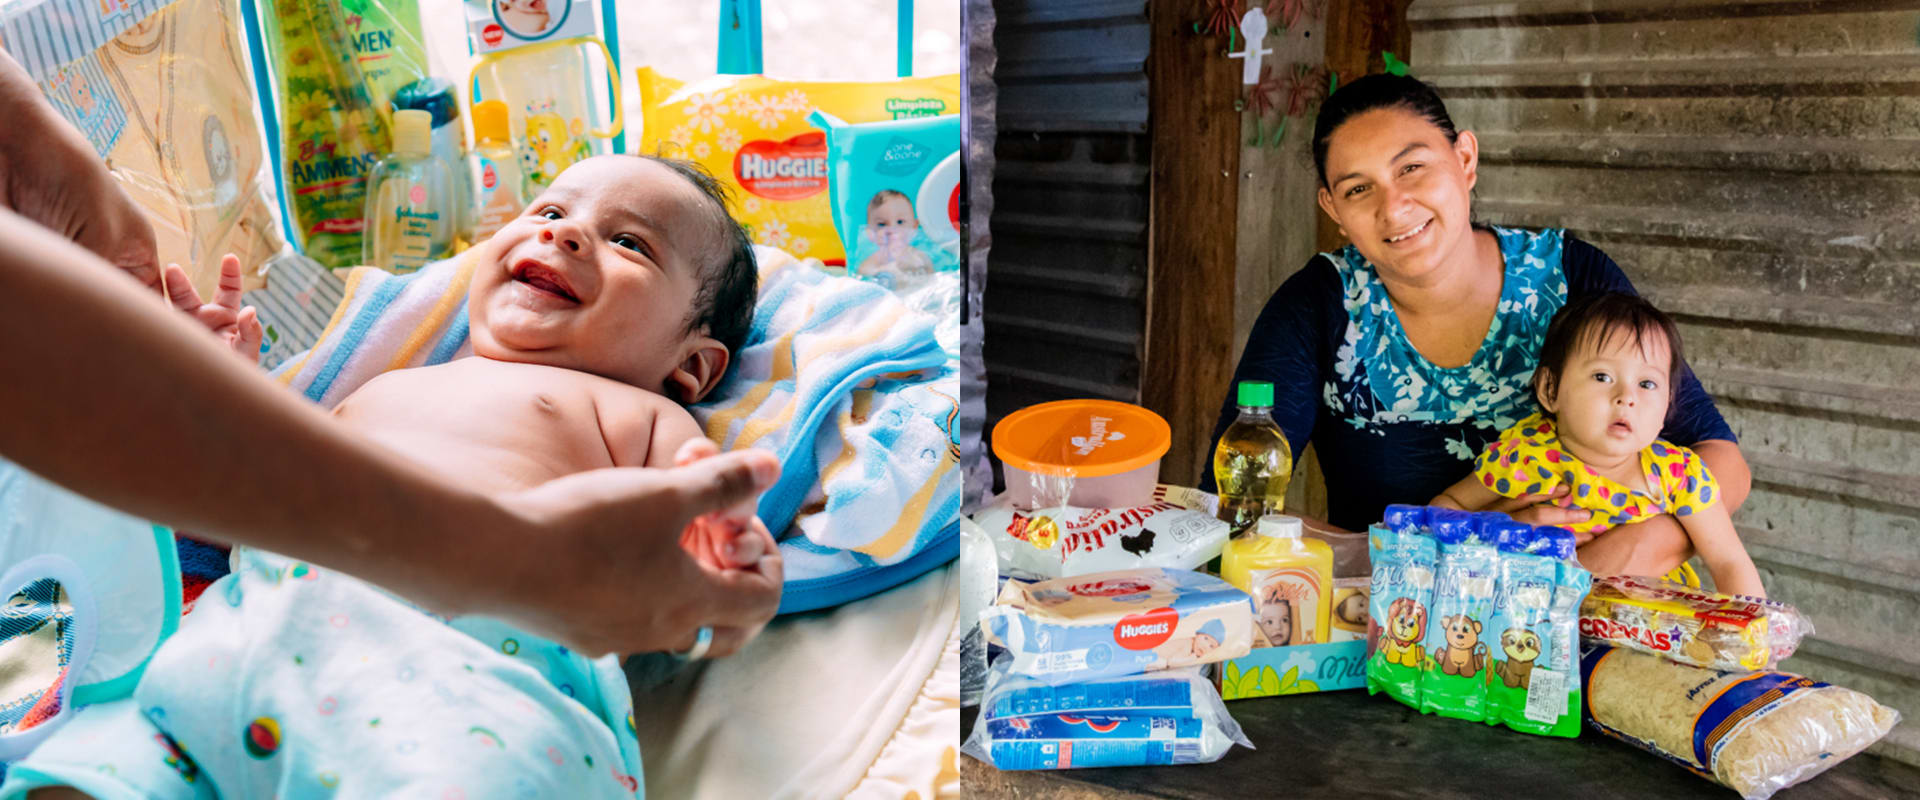 A picture of a baby laying on blankets while smiling is side by side with a picture of a mother and child sitting in front of packaged food.